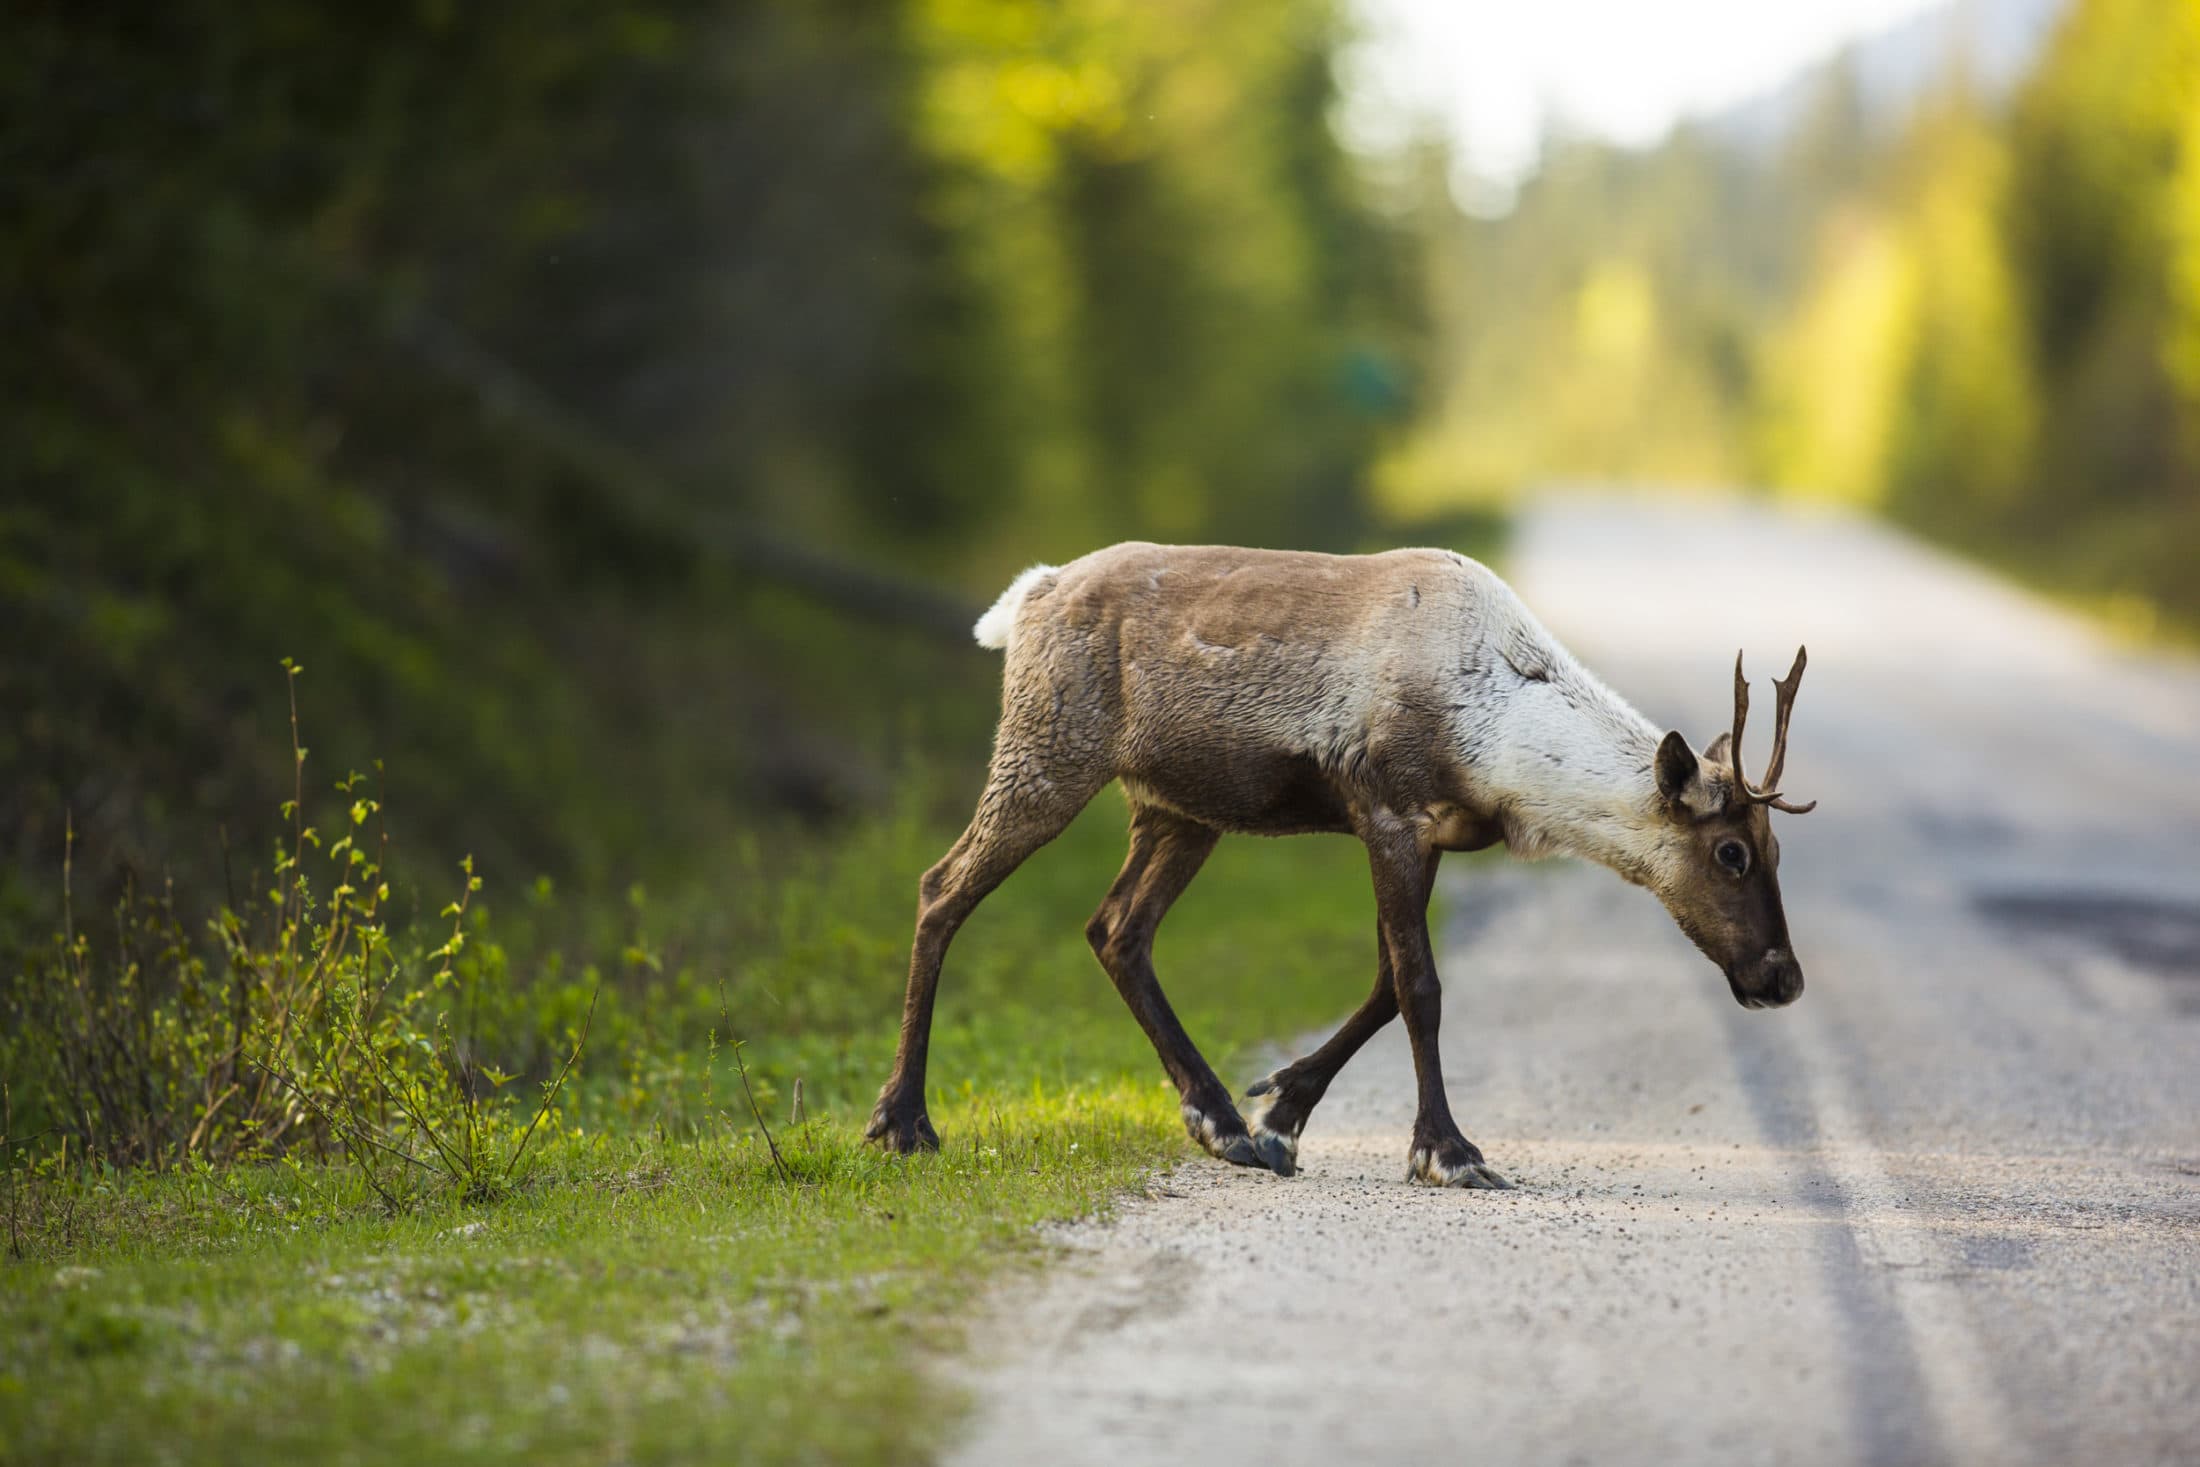 BC mine proposed in critical caribou habitat shows how endangered species ‘fall through the cracks’